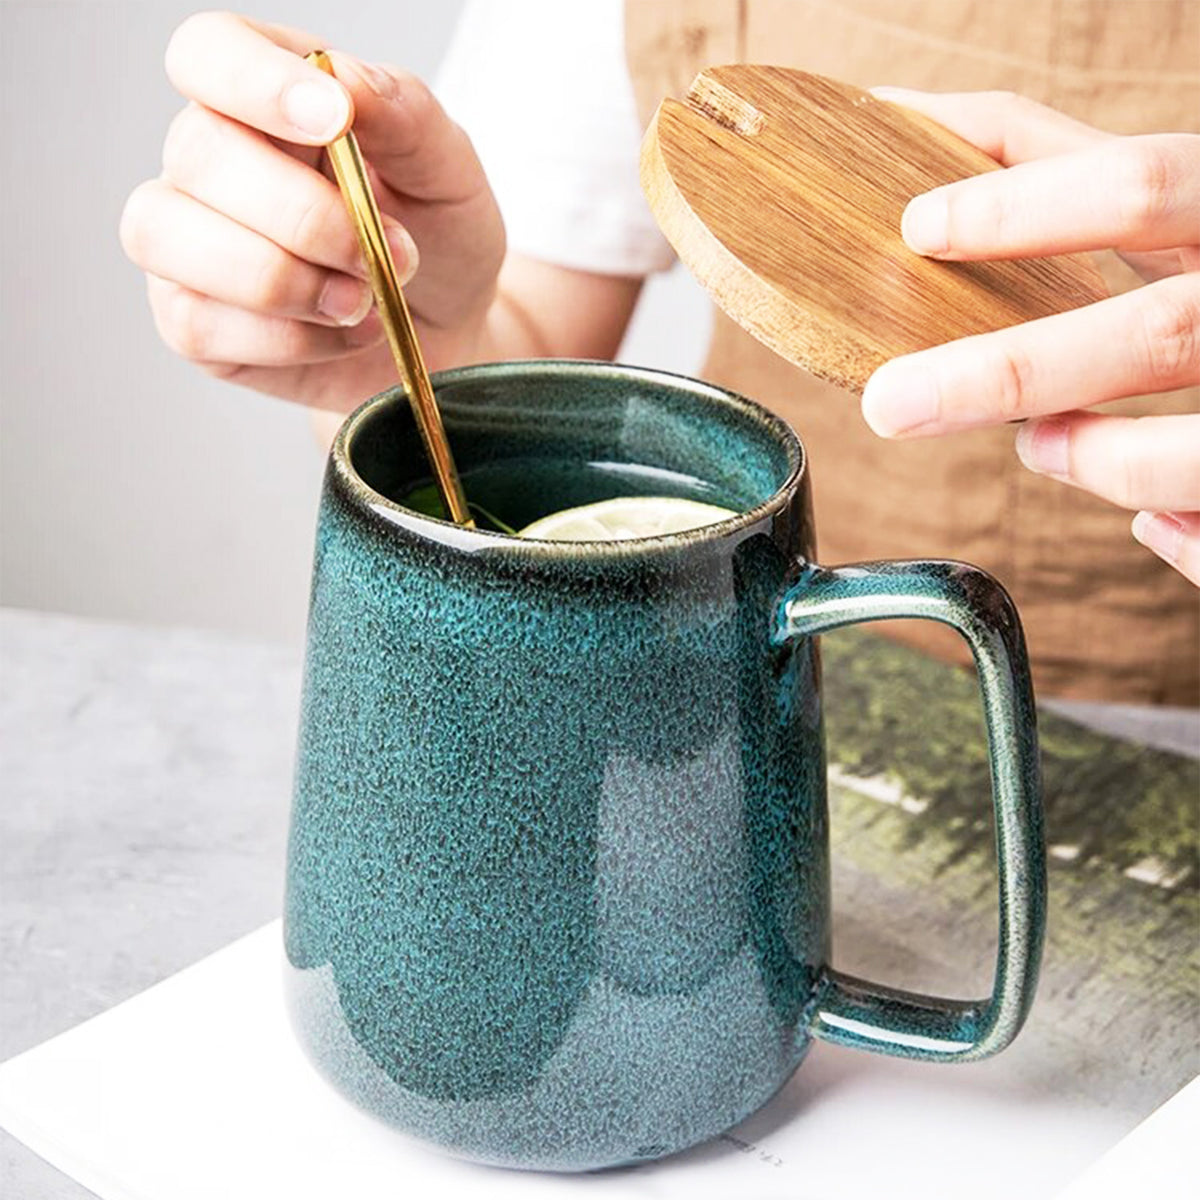 Super-sized Mugs with Handy Four-Finger Grip